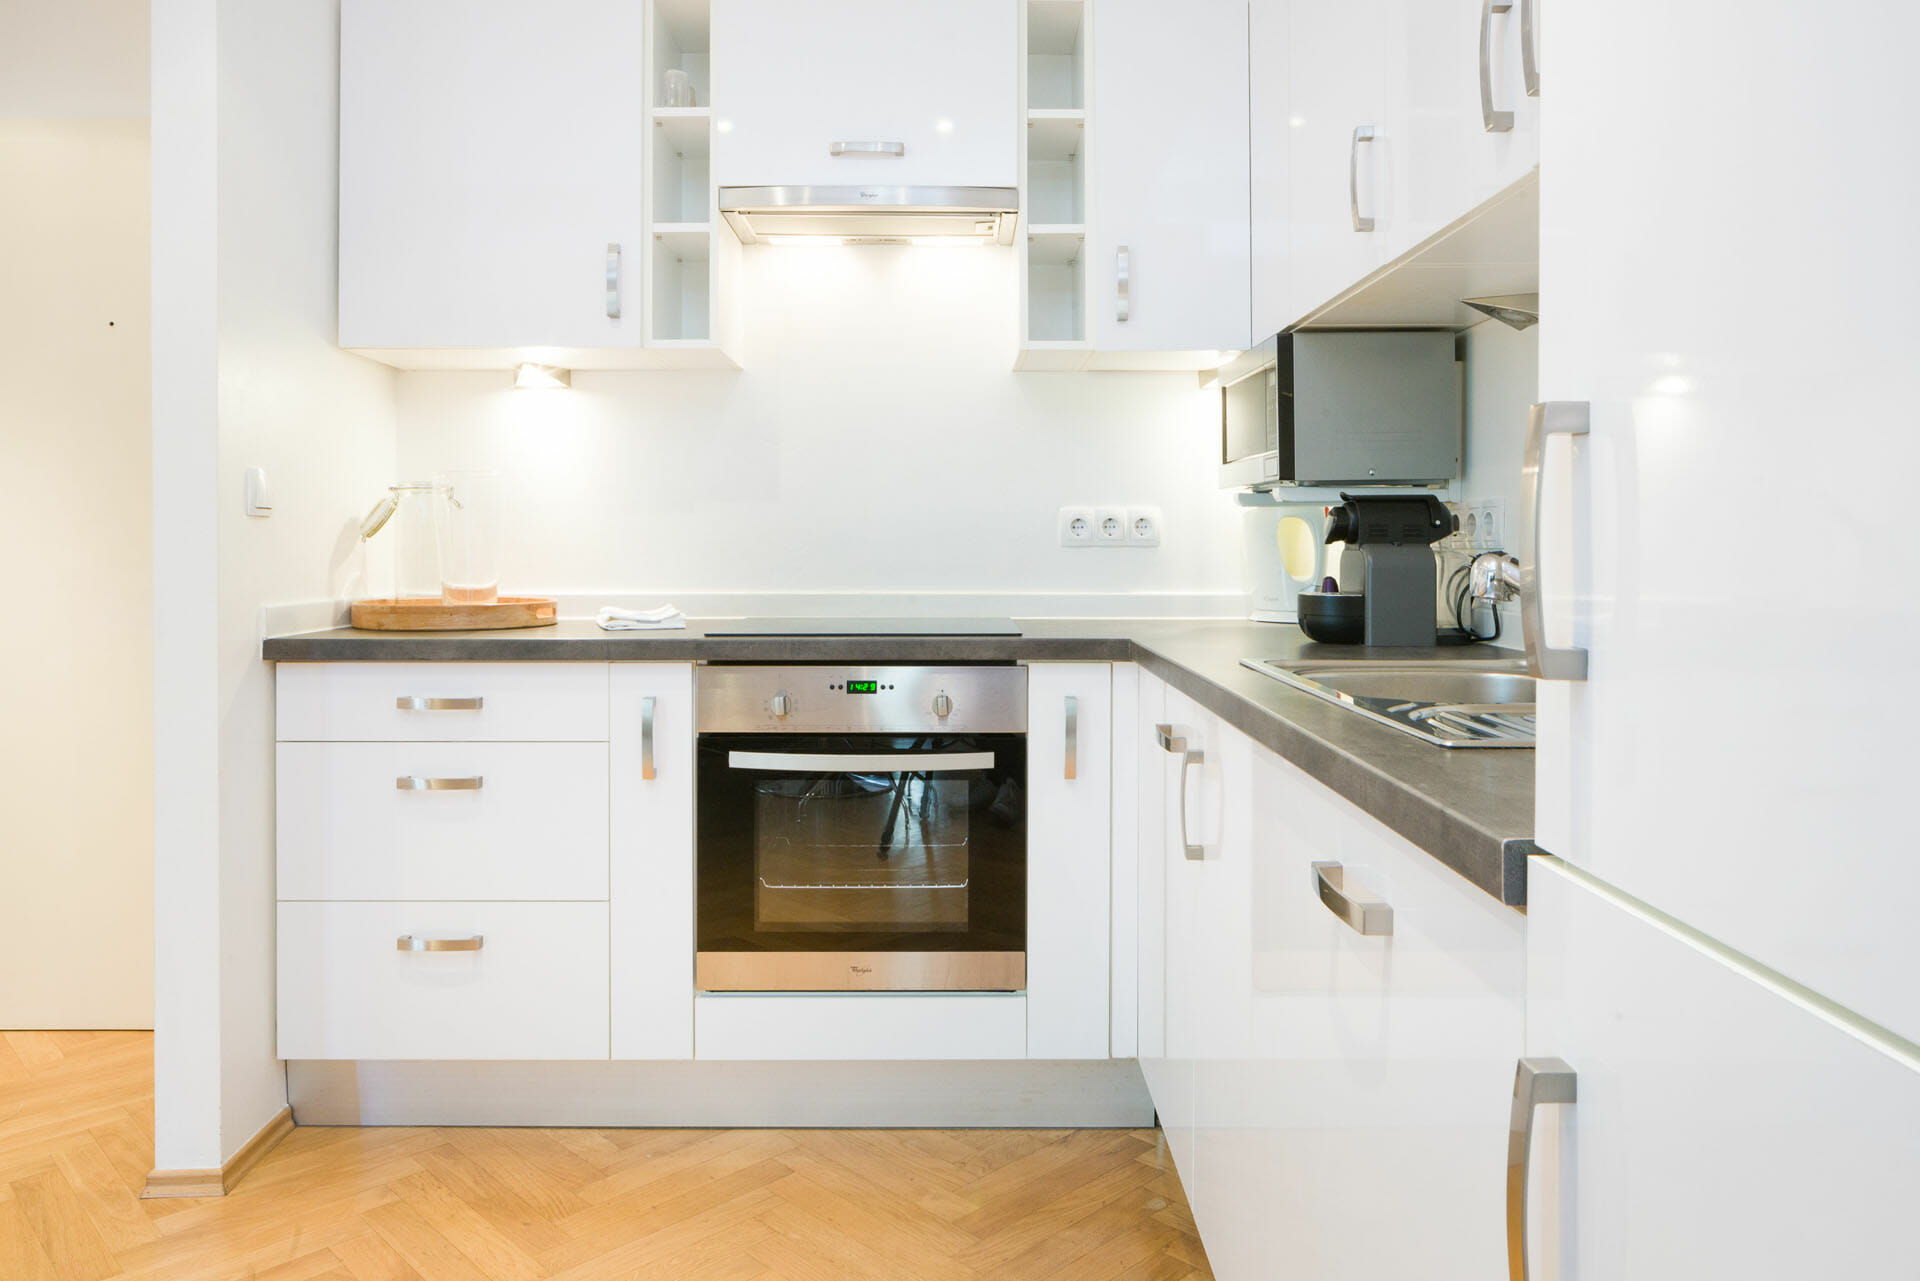 Prestige Apartments in Vienna Spacious Apartment close to Palais Liechtenstein. Bindergasse 5 - 9. Equipment: electric stove, oven, refrigerator, freezer, coffee machine, water heater, toaster.  Internet, Digital Cable TV, Fully equipped kitchen, Fully furnished interior, Non smoking.